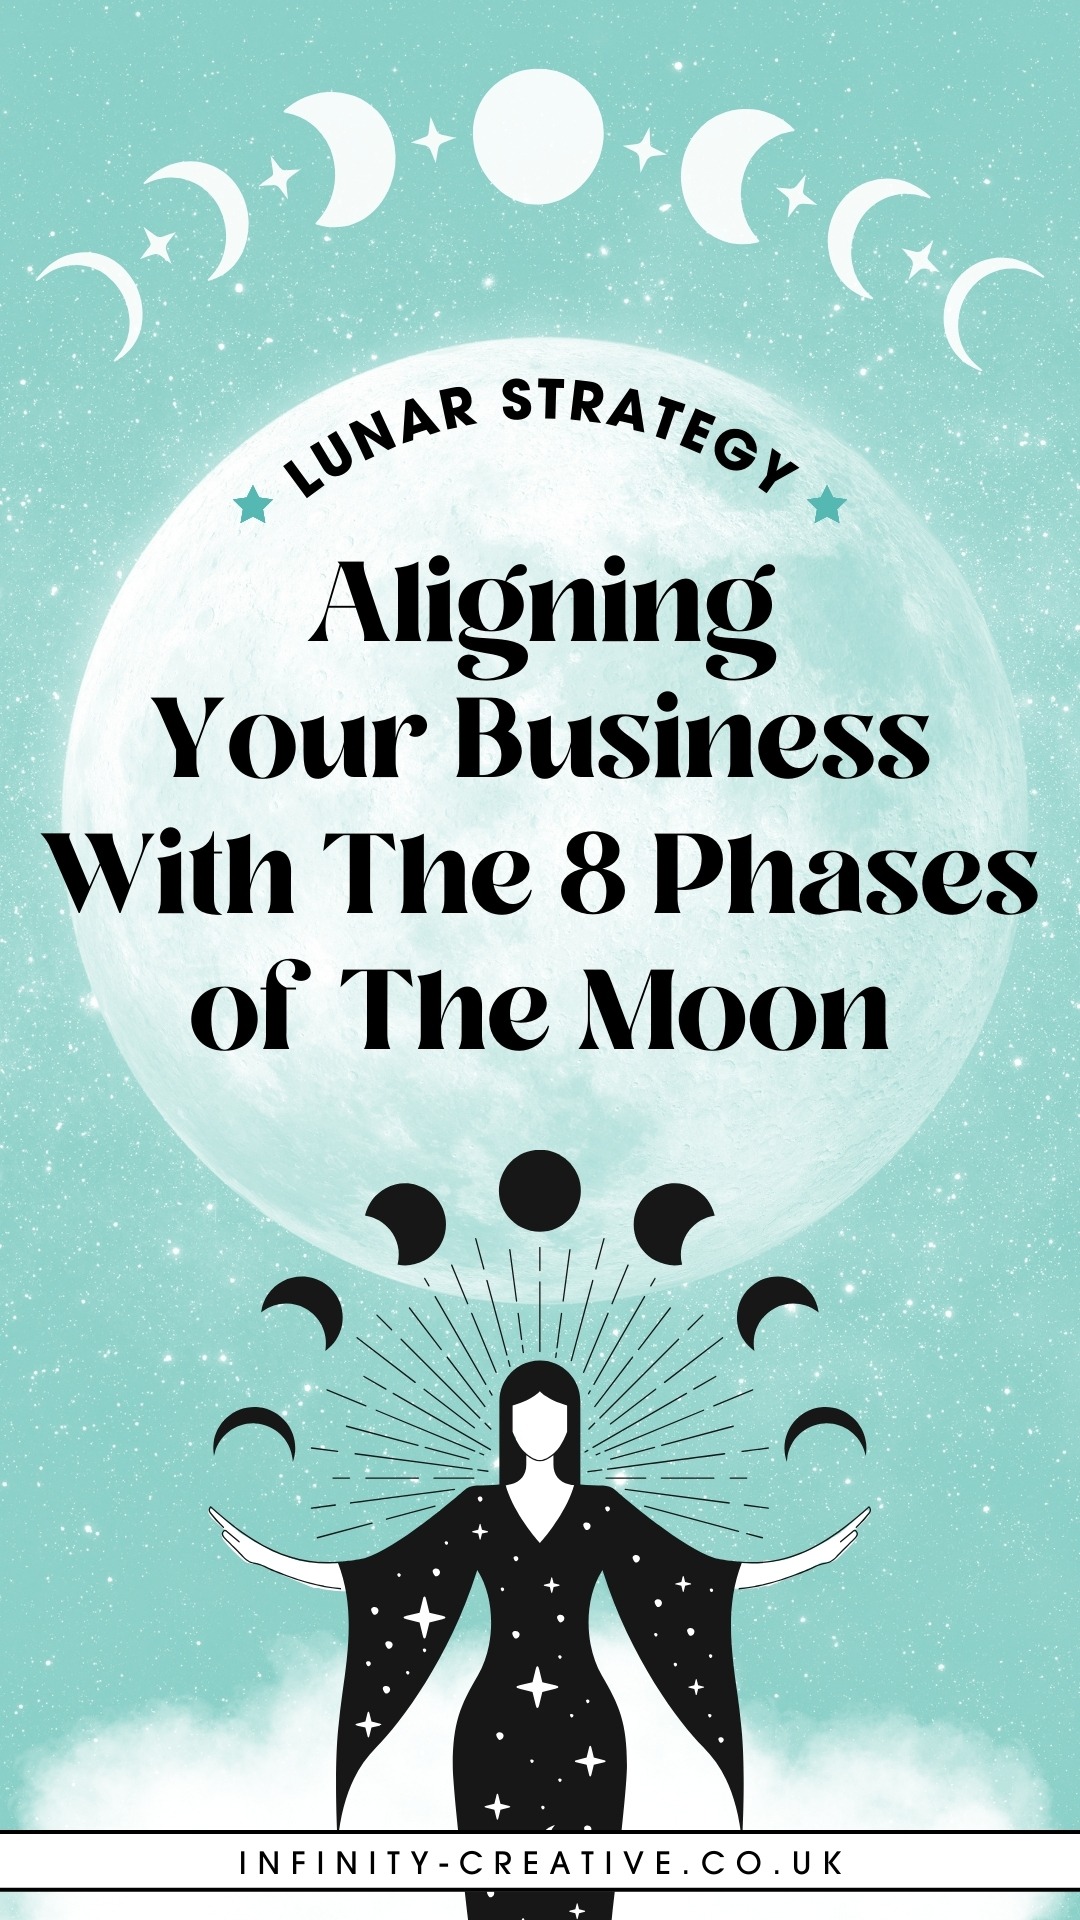 Aligning Your Business With The 8 Phases Of The Moon